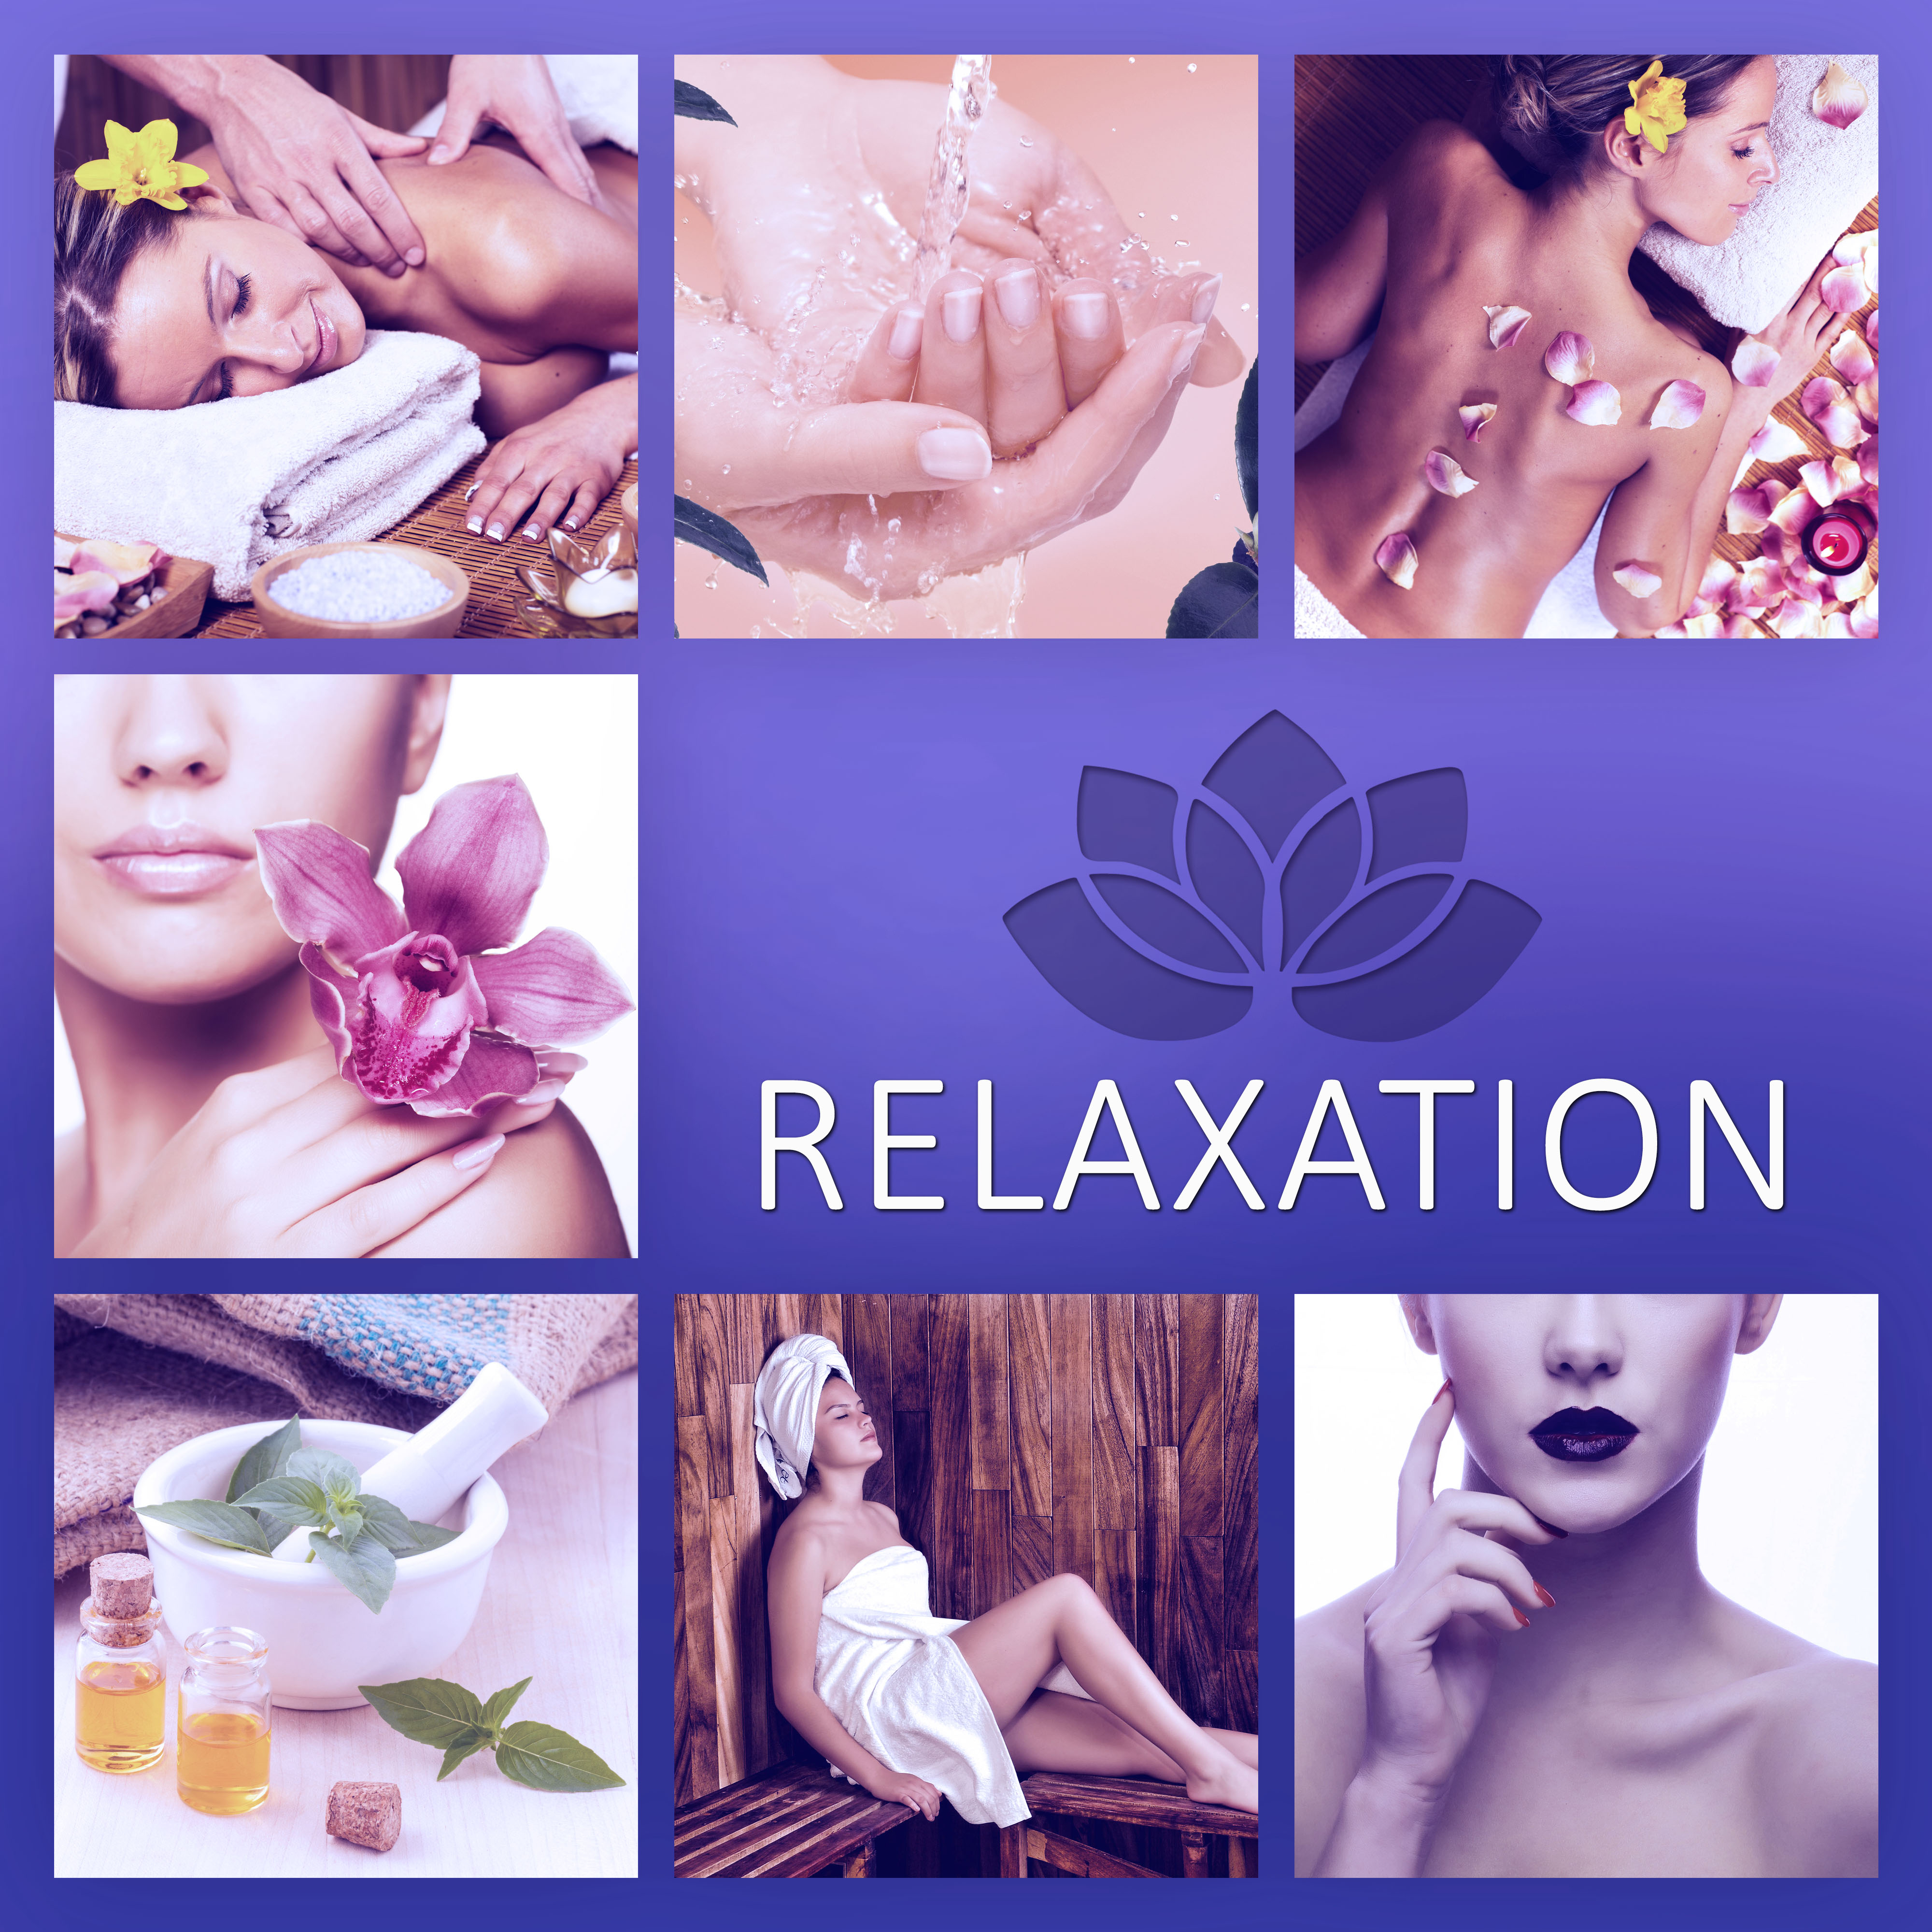 Relaxation – Nature Sounds, Spa Music for Massage, Deep Relaxing Massage, Reiki, Zen, Meditation, Healing Therapy